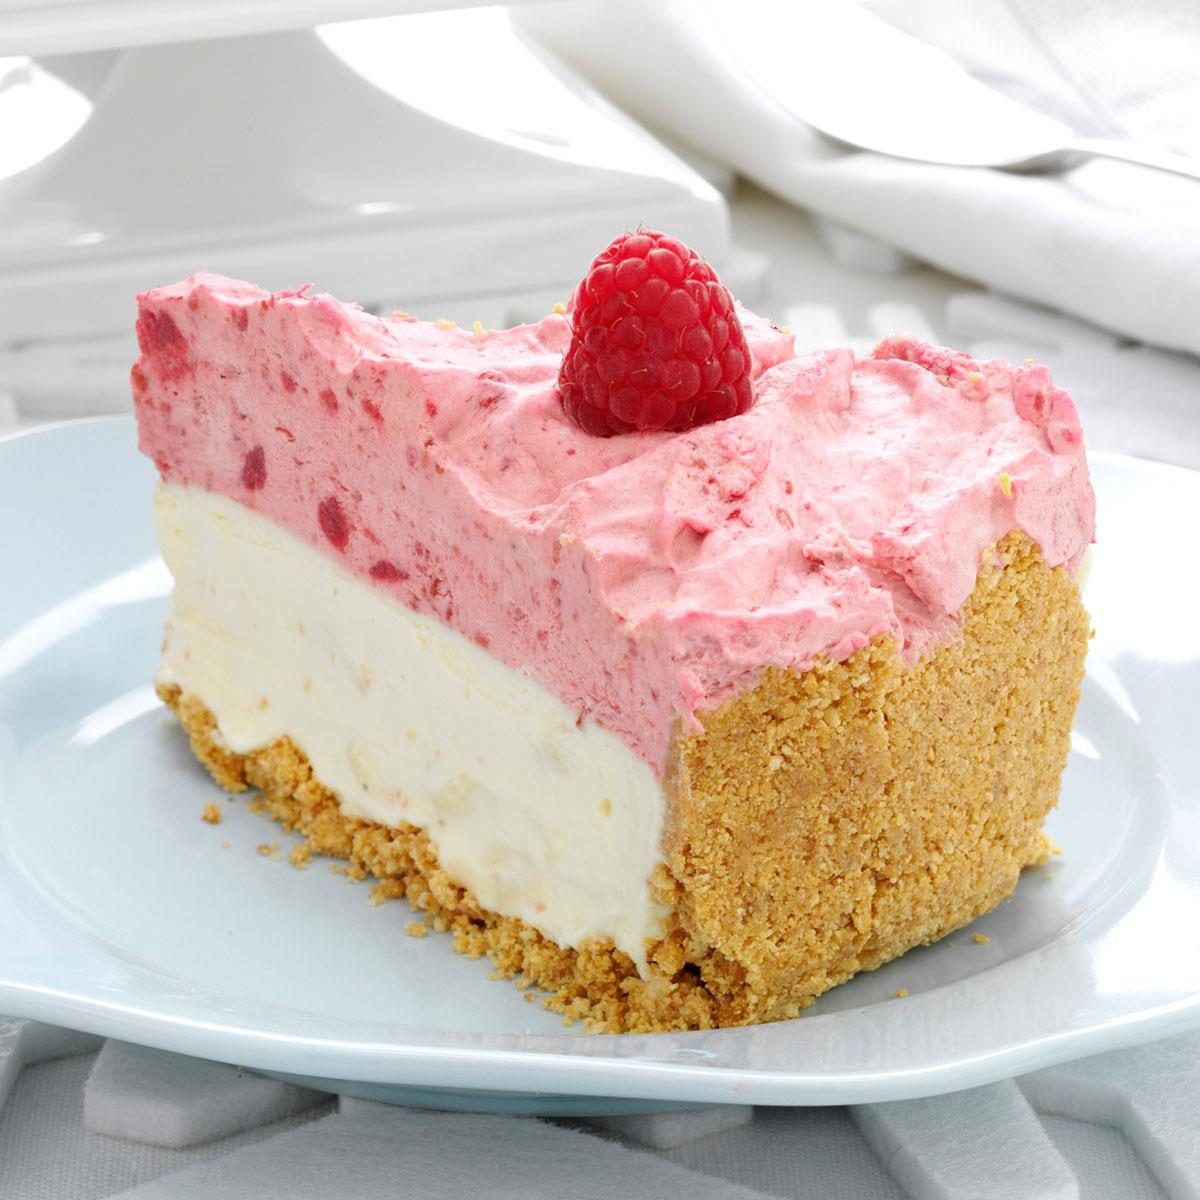 Raspberry Mousse Recipe: How to Make It